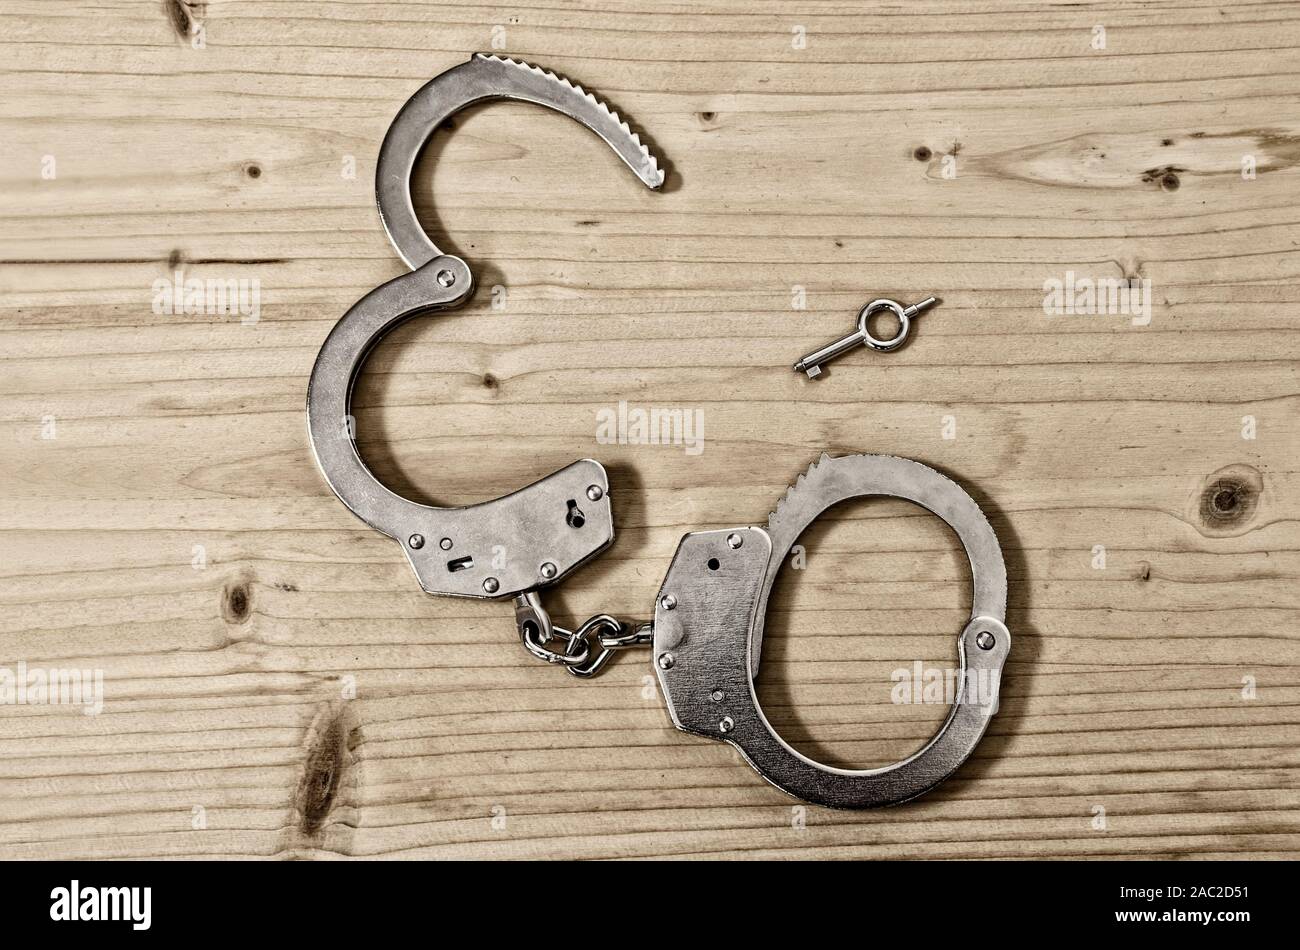 Top view of open handcuffs and key on a wooden table close-up. Crime and violence concept Stock Photo